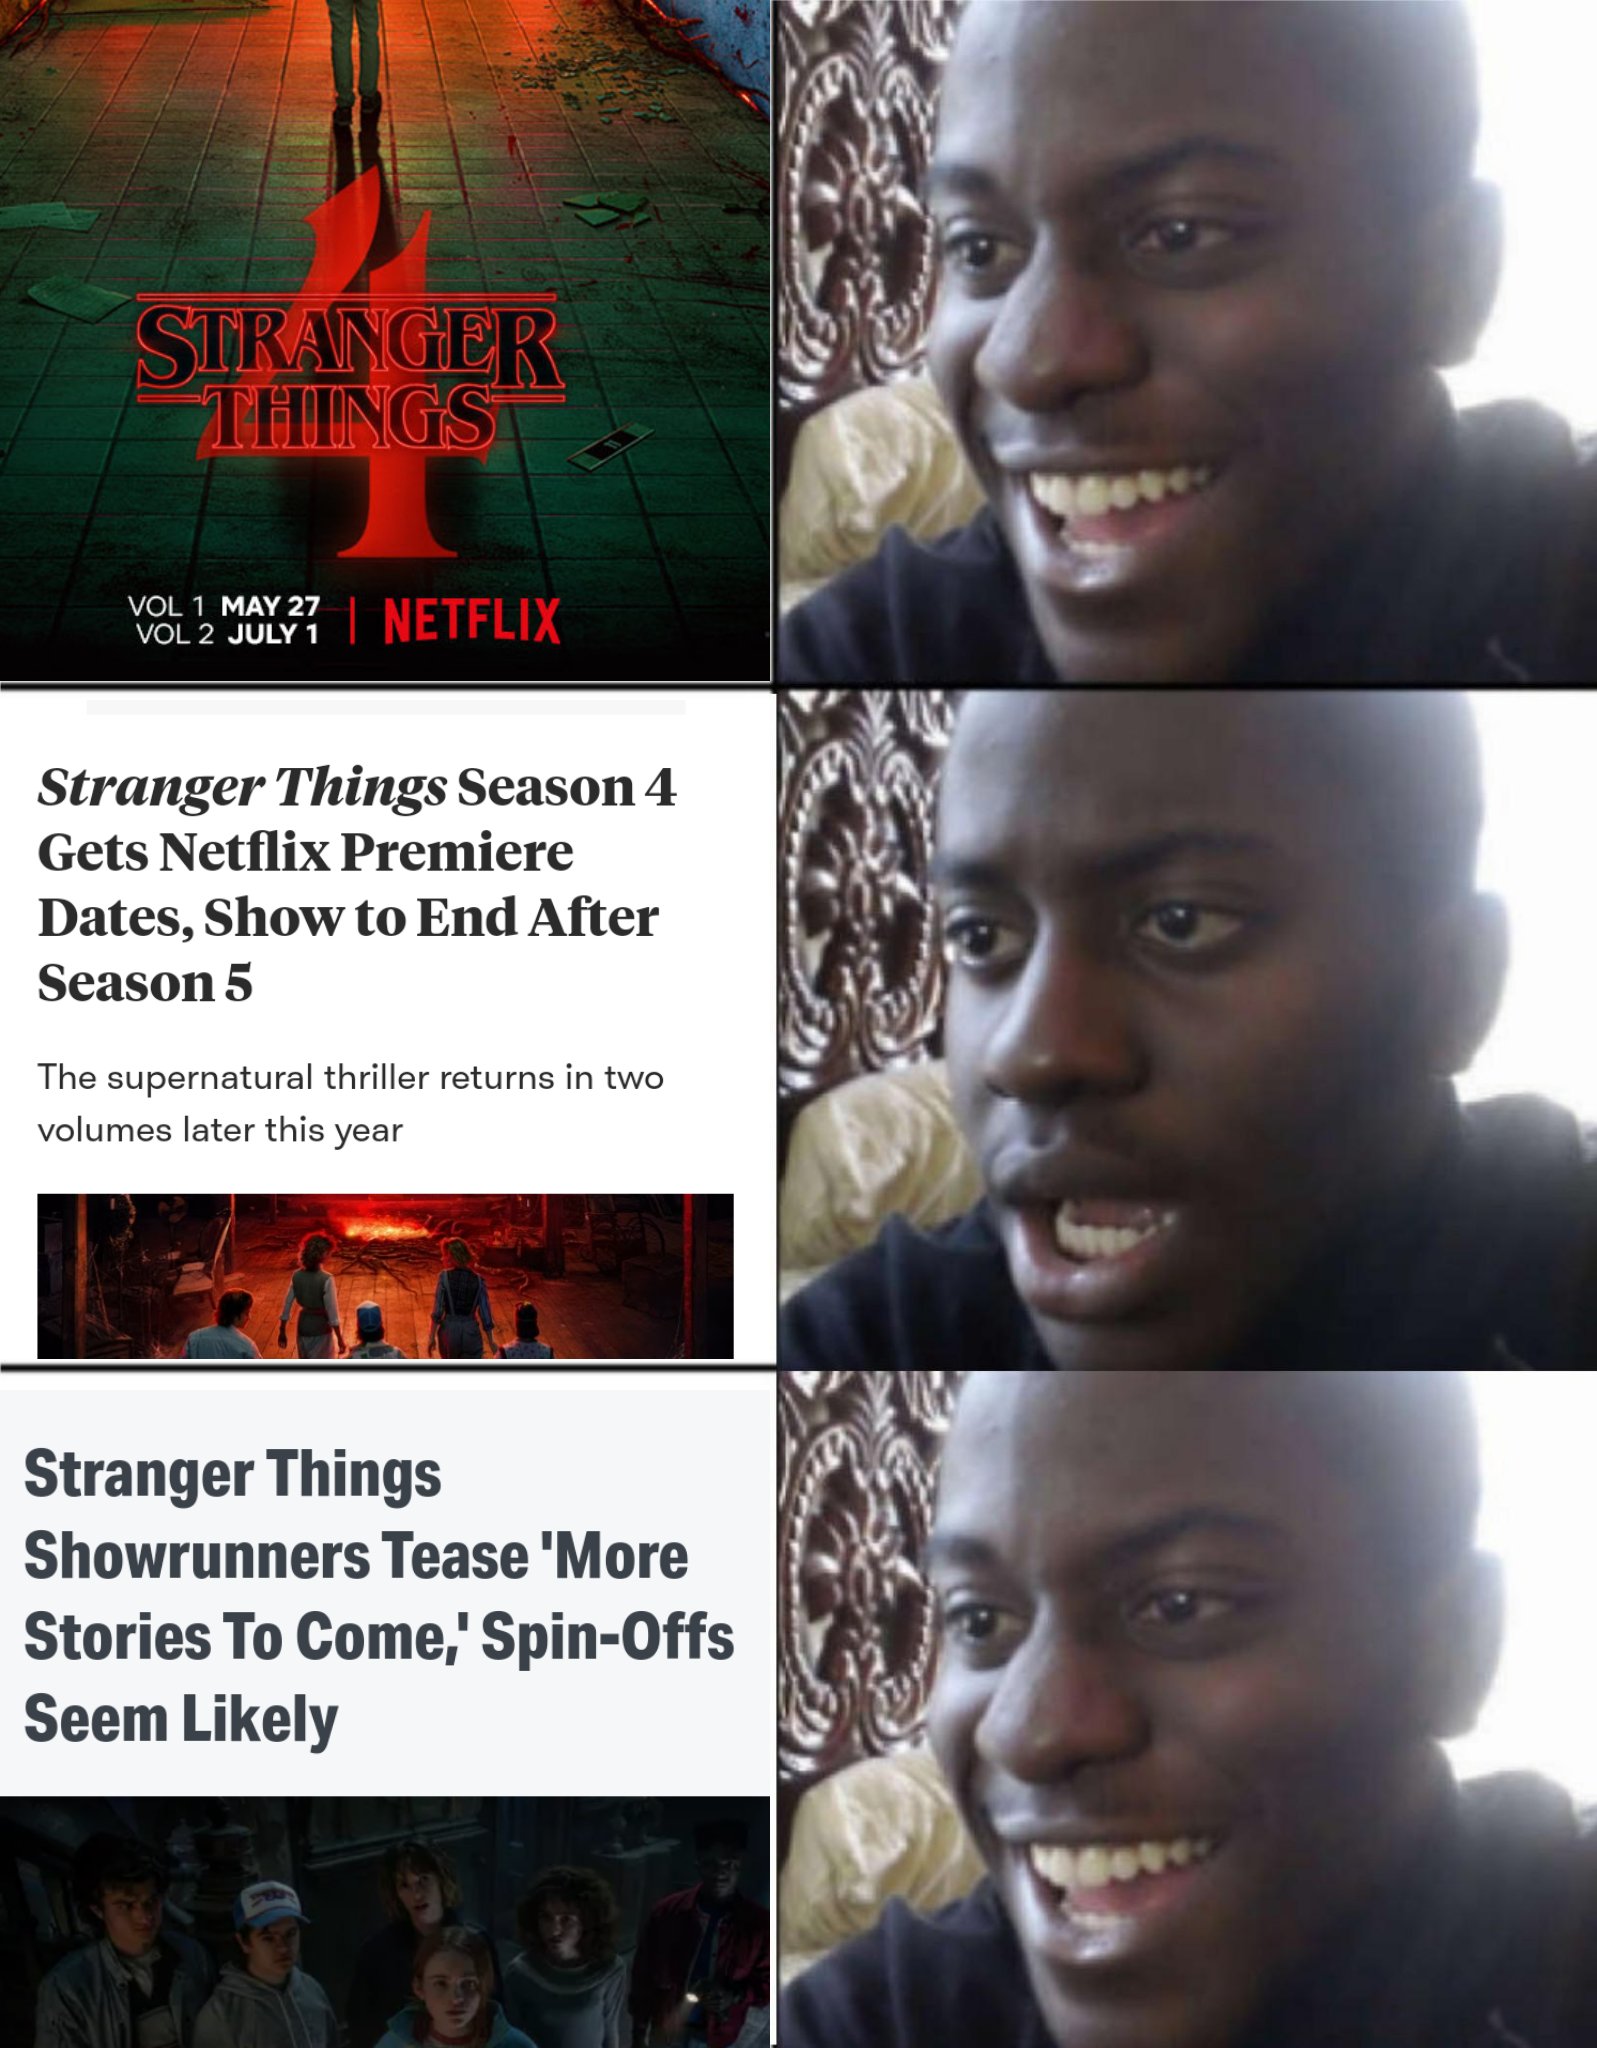 Stranger Things 4 Volume 2 memes: All the best tweets and